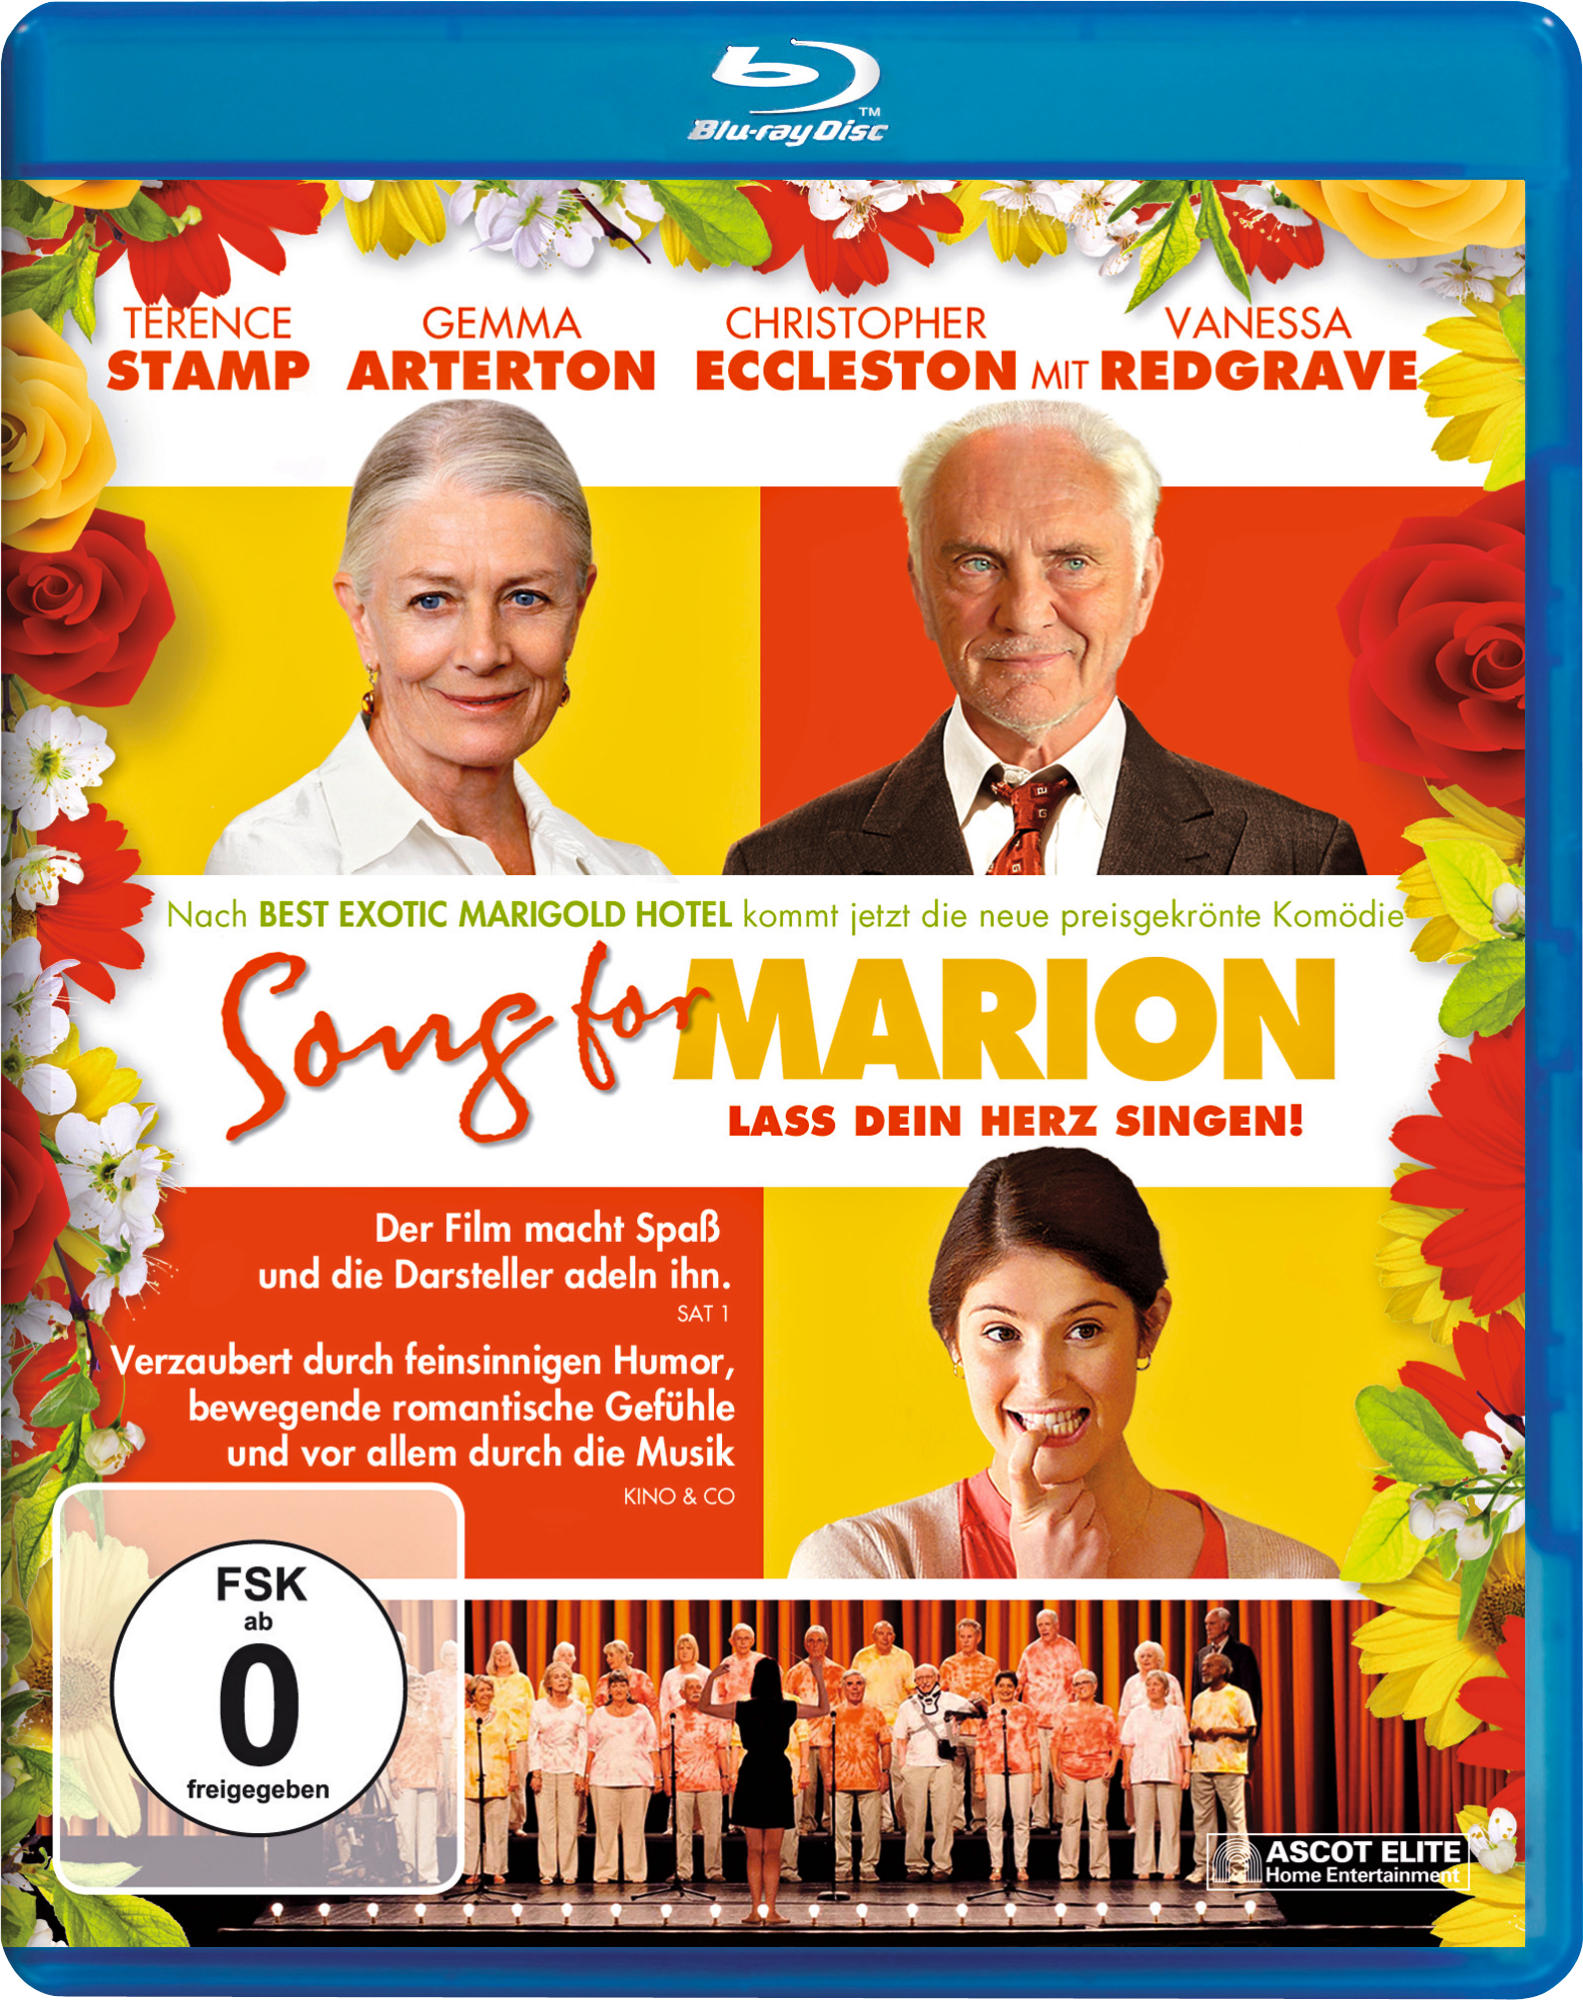 Song for Blu-ray Marion